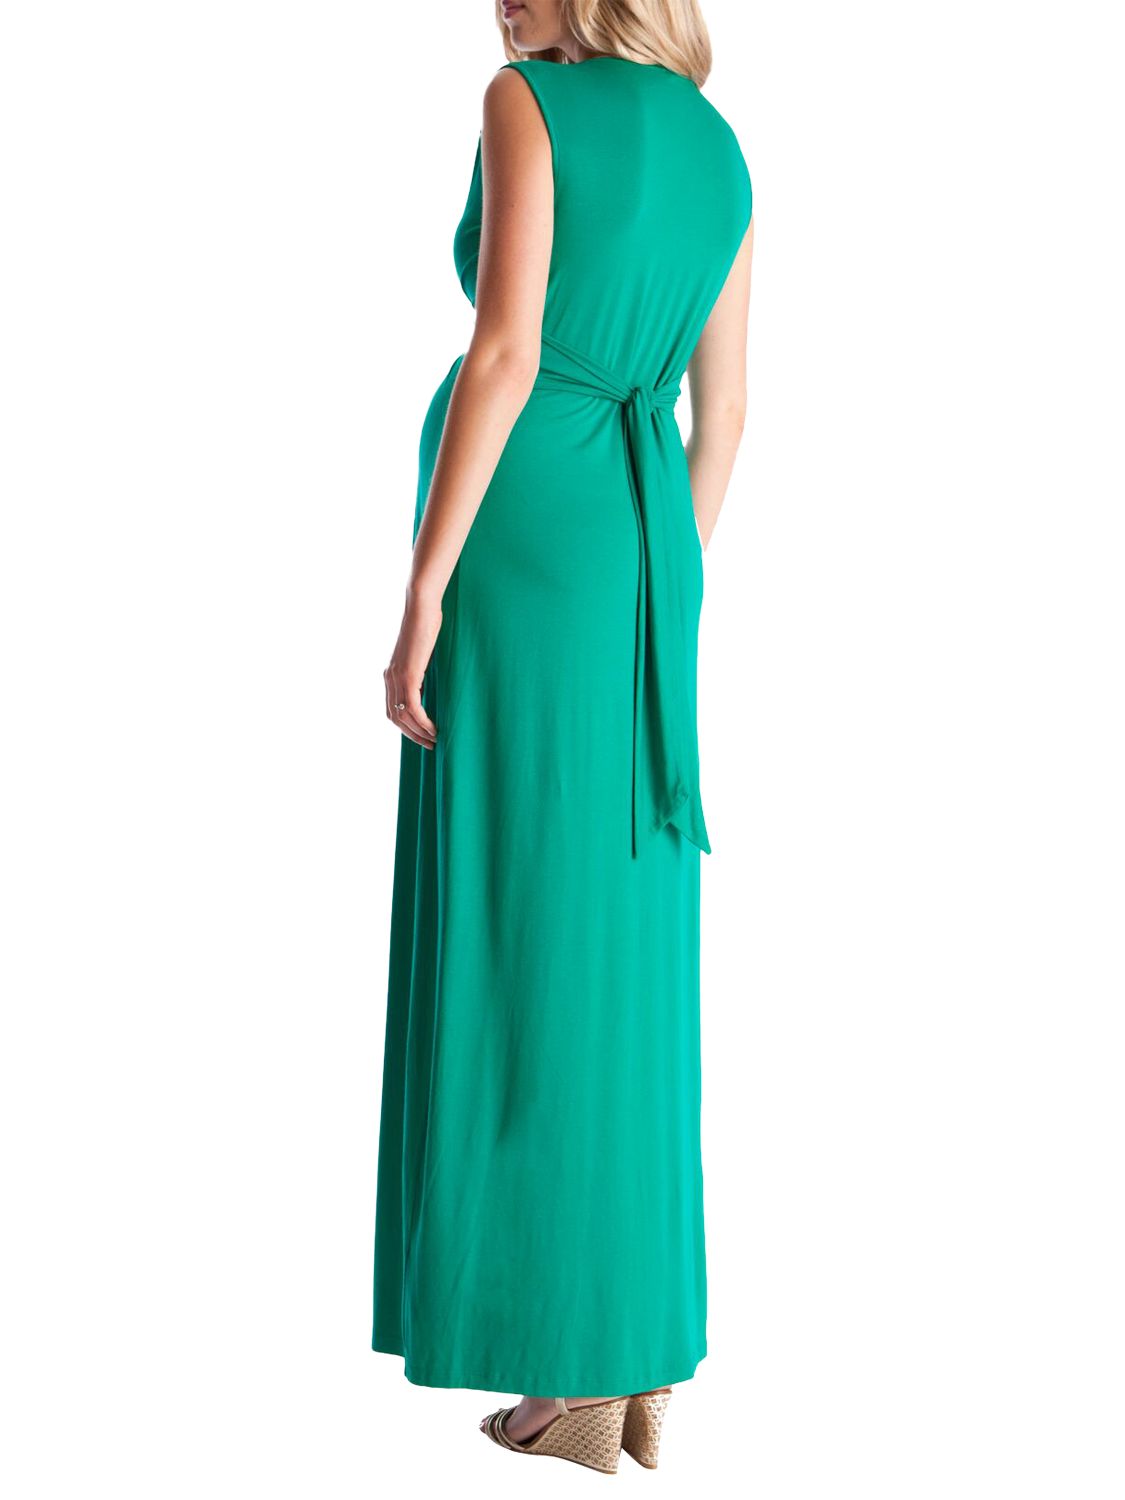 Séraphine Knot Front Maxi Maternity Dress, Emerald